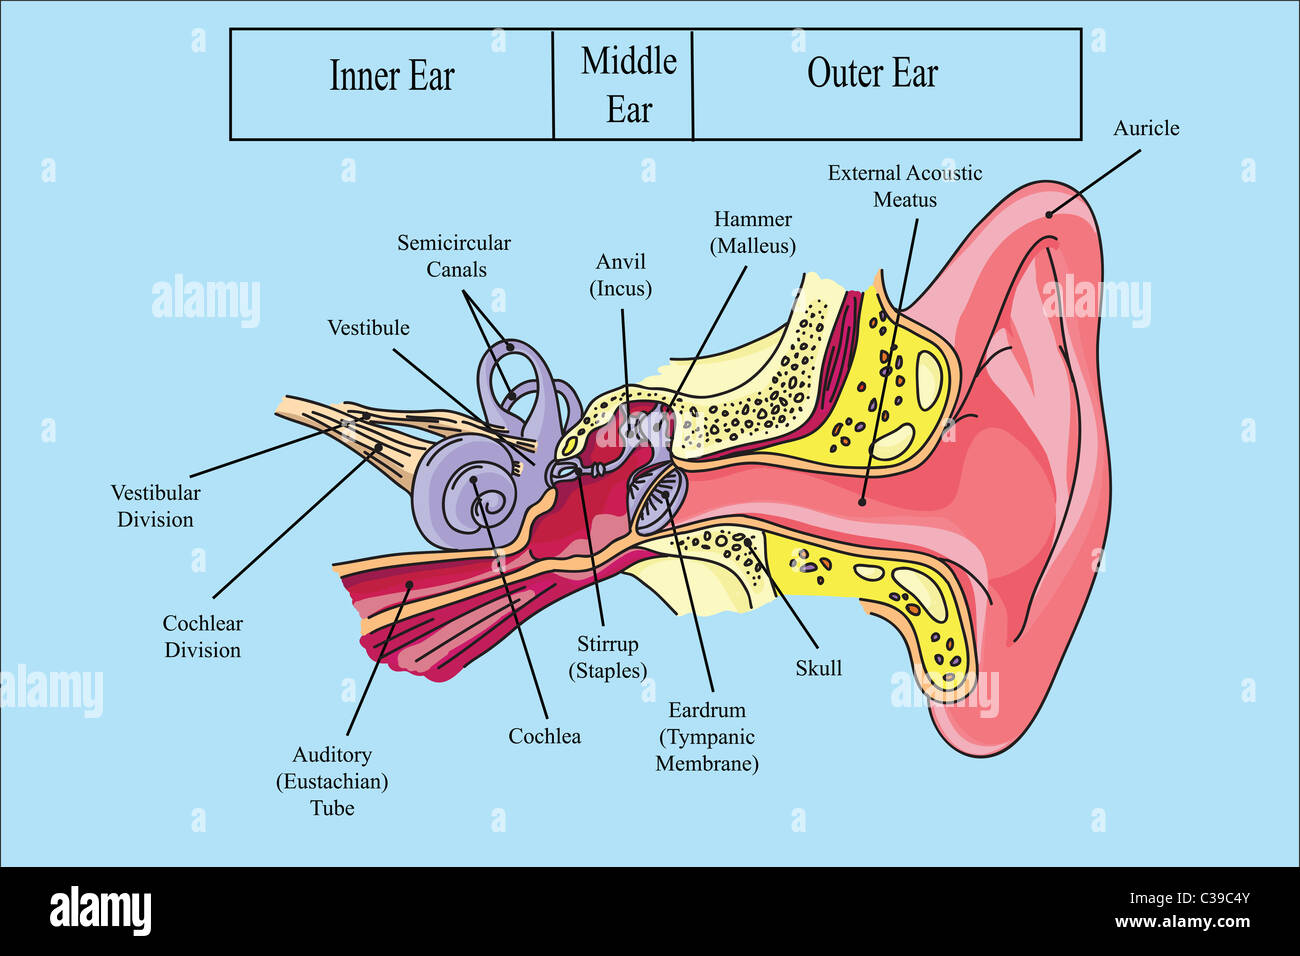 Structure of human ear illustration Stock Photo